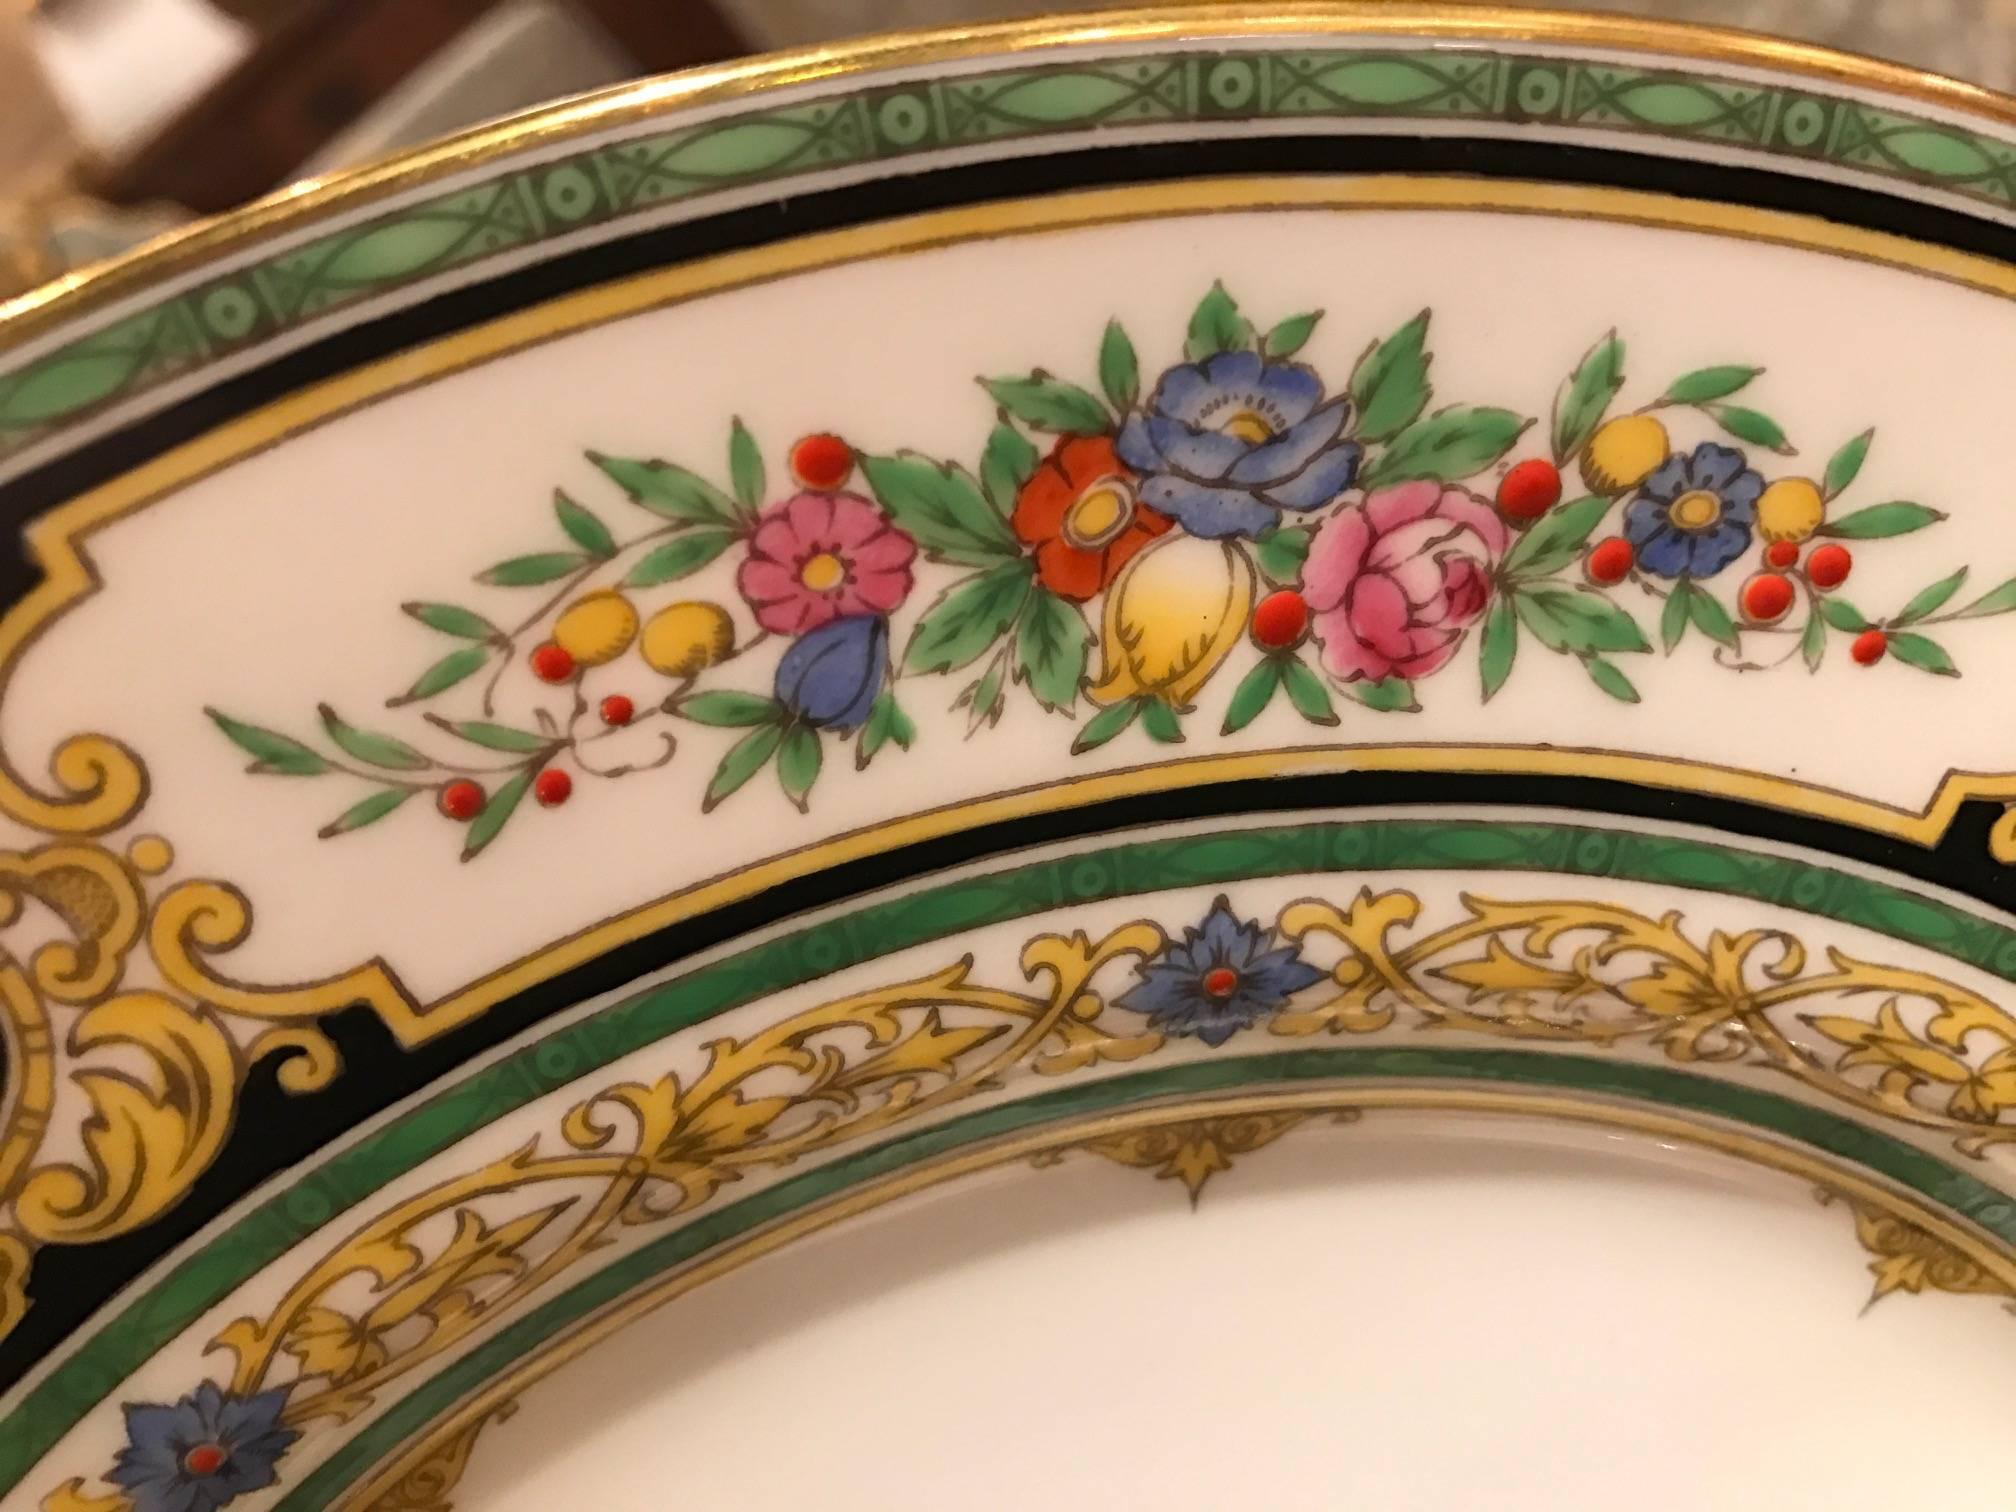 Porcelain Set of 12 Hand-Painted English Dinner Service Plates by Minton